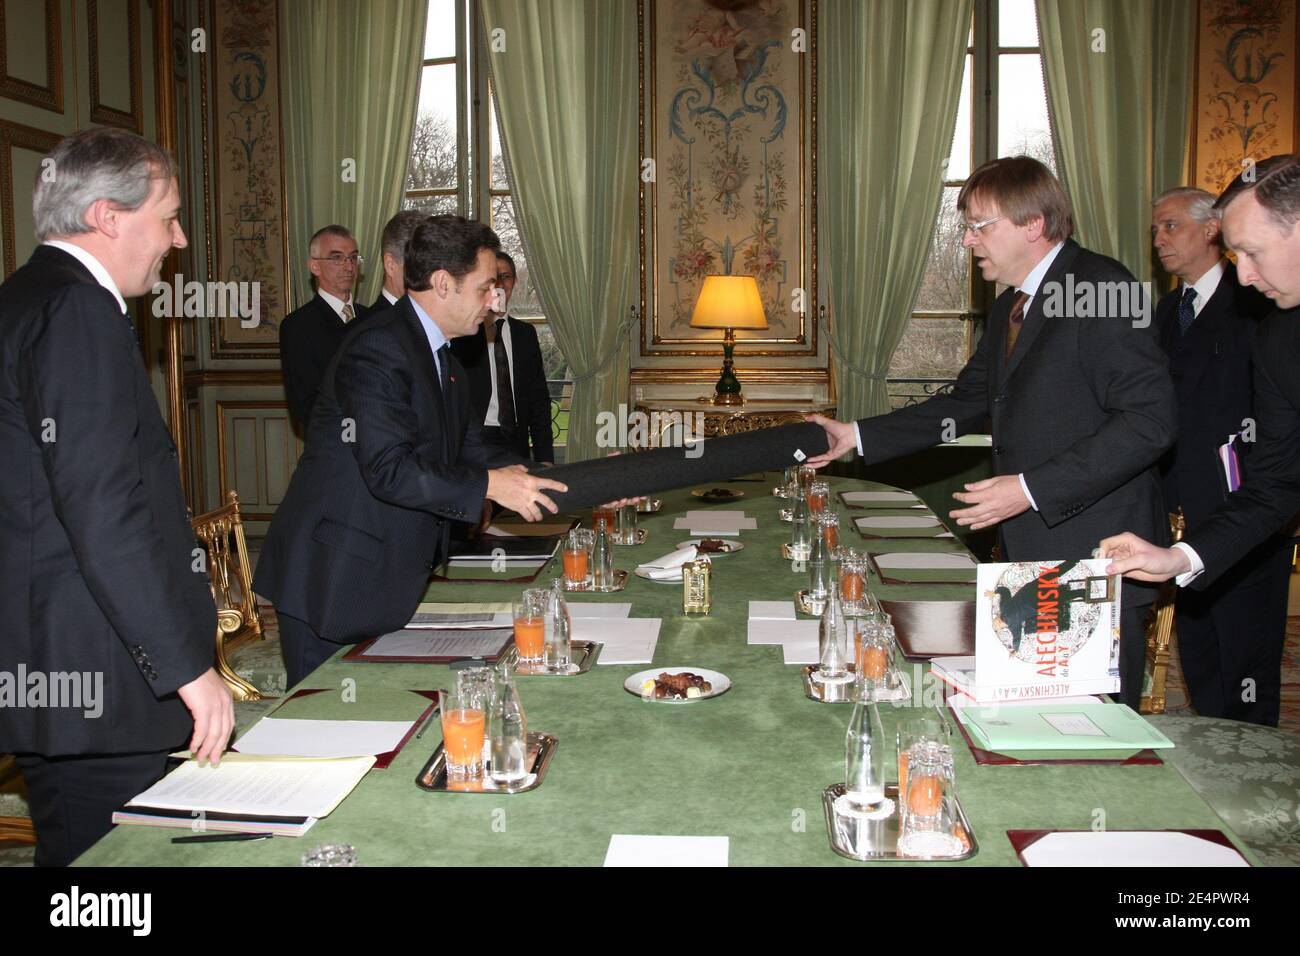 French president Nicolas Sarkozy receives a book by Belgian painter Pierre Alechinsky from Belgium's Prime Minister Guy Verhofstadt during a meeting at the Elysee Palace in Paris, France, on February 20, 2008. Acting Belgian Prime Minister Guy Verhofstadt said on February 19, he will stand down on March 20 to be replaced by the leader of the Flemish Christian Democrats, Yves Leterme. Photo by Alain Benainous/Pool/ABACAPRESS.COM Local Caption 20/02/2008.French President Nicolas Sarkozy meeting with the Belgium s prime minister Pierre Alechinsky at the Elysee Palace Stock Photo